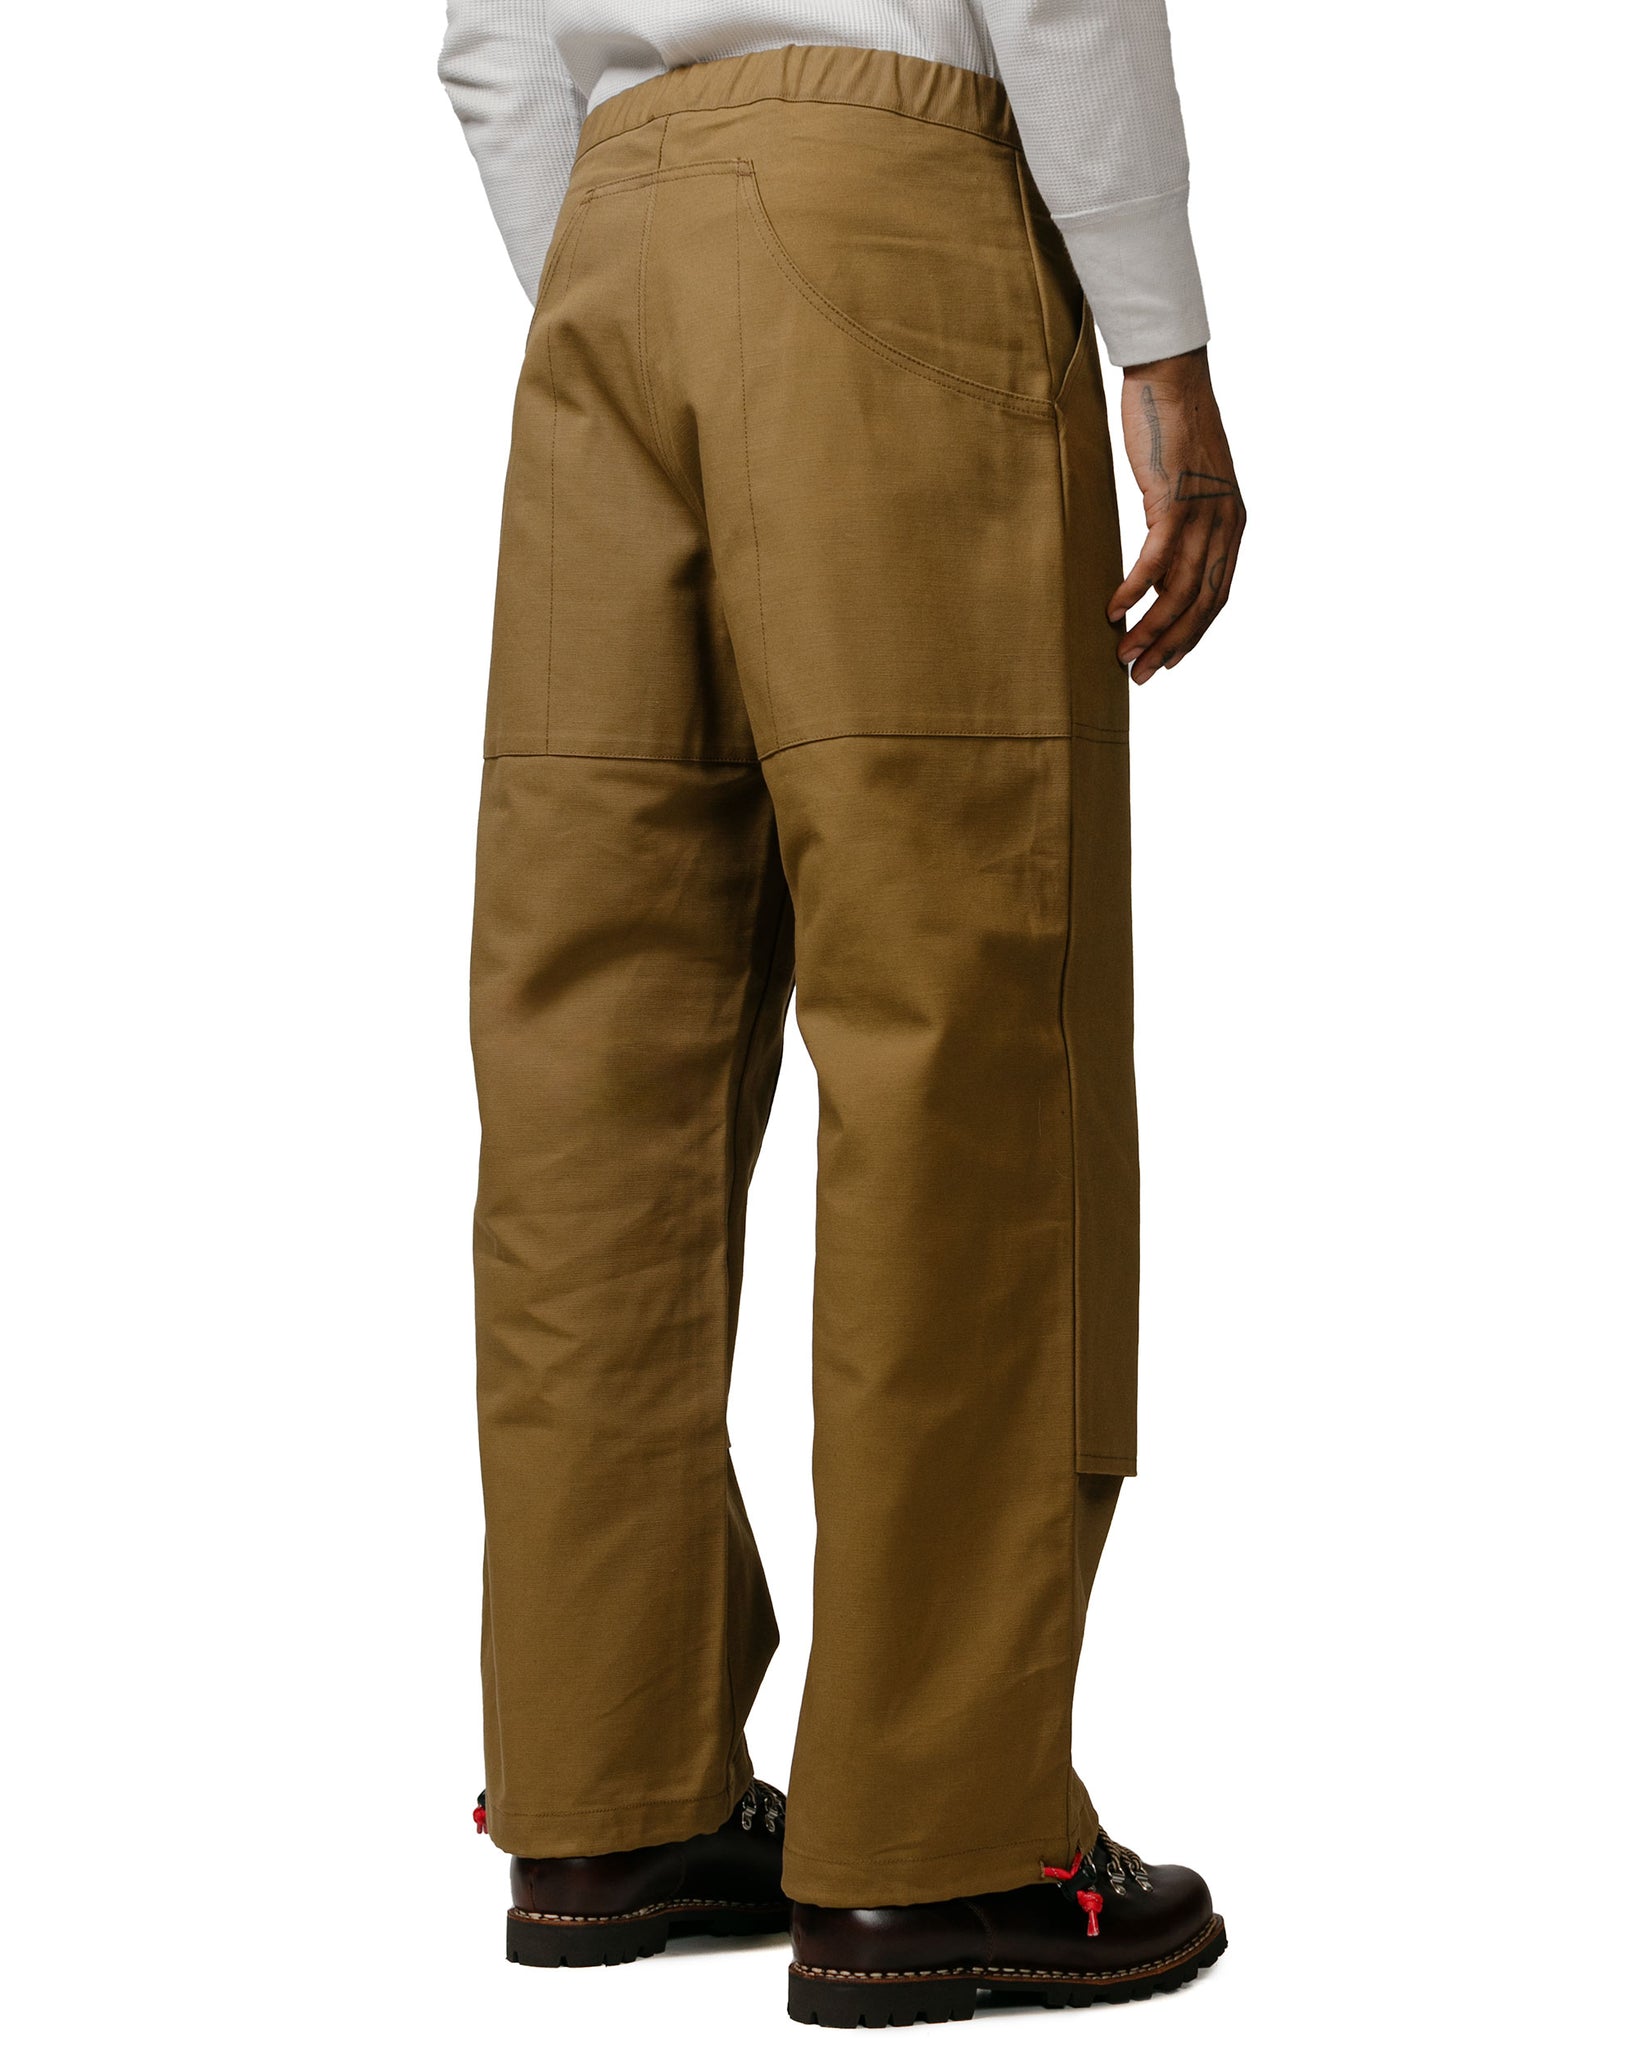 The Real McCoy's MP23104 Cotton Duck Climber's Pants Brown model back